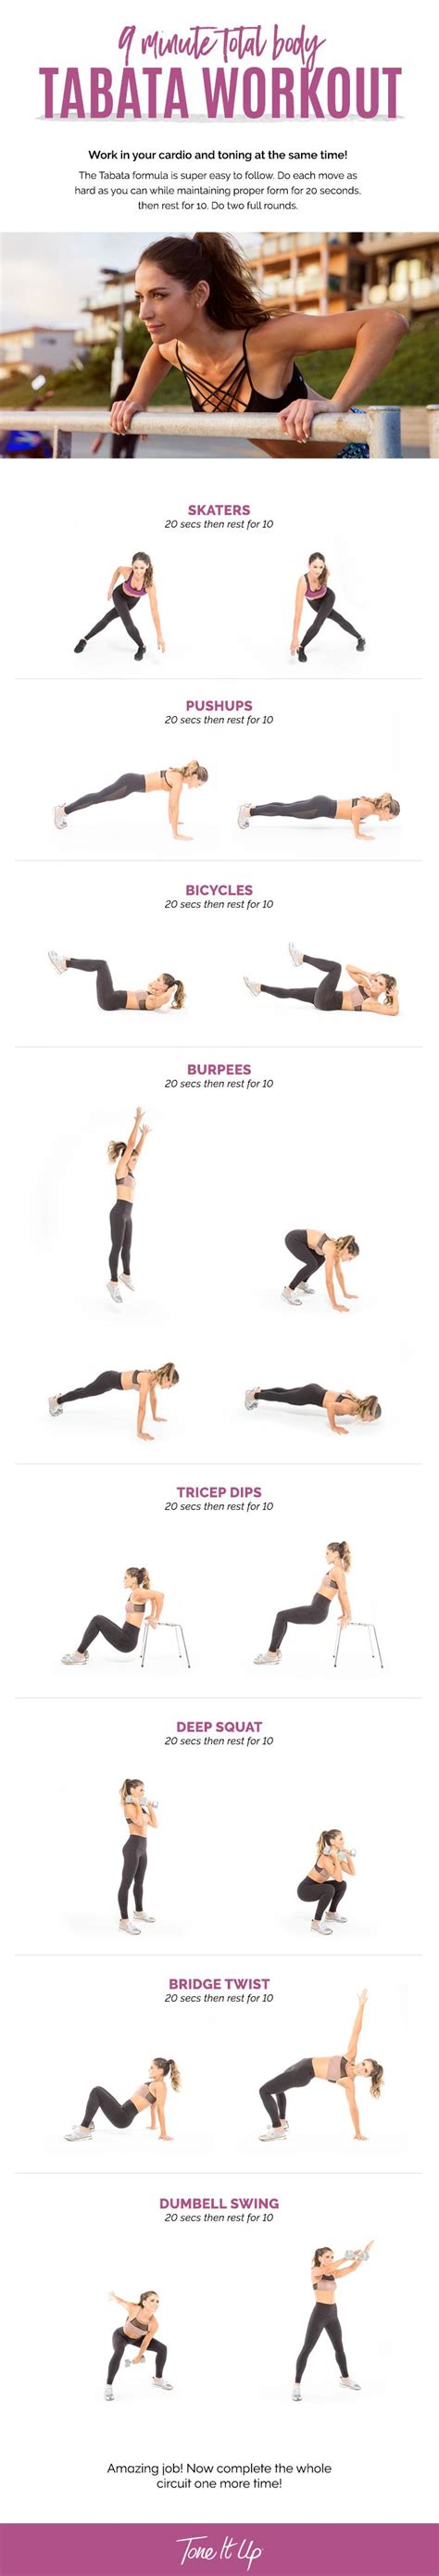 9 Minute Total Body Tabata Workout Tabata Workouts Tone It Up Fitness Tips